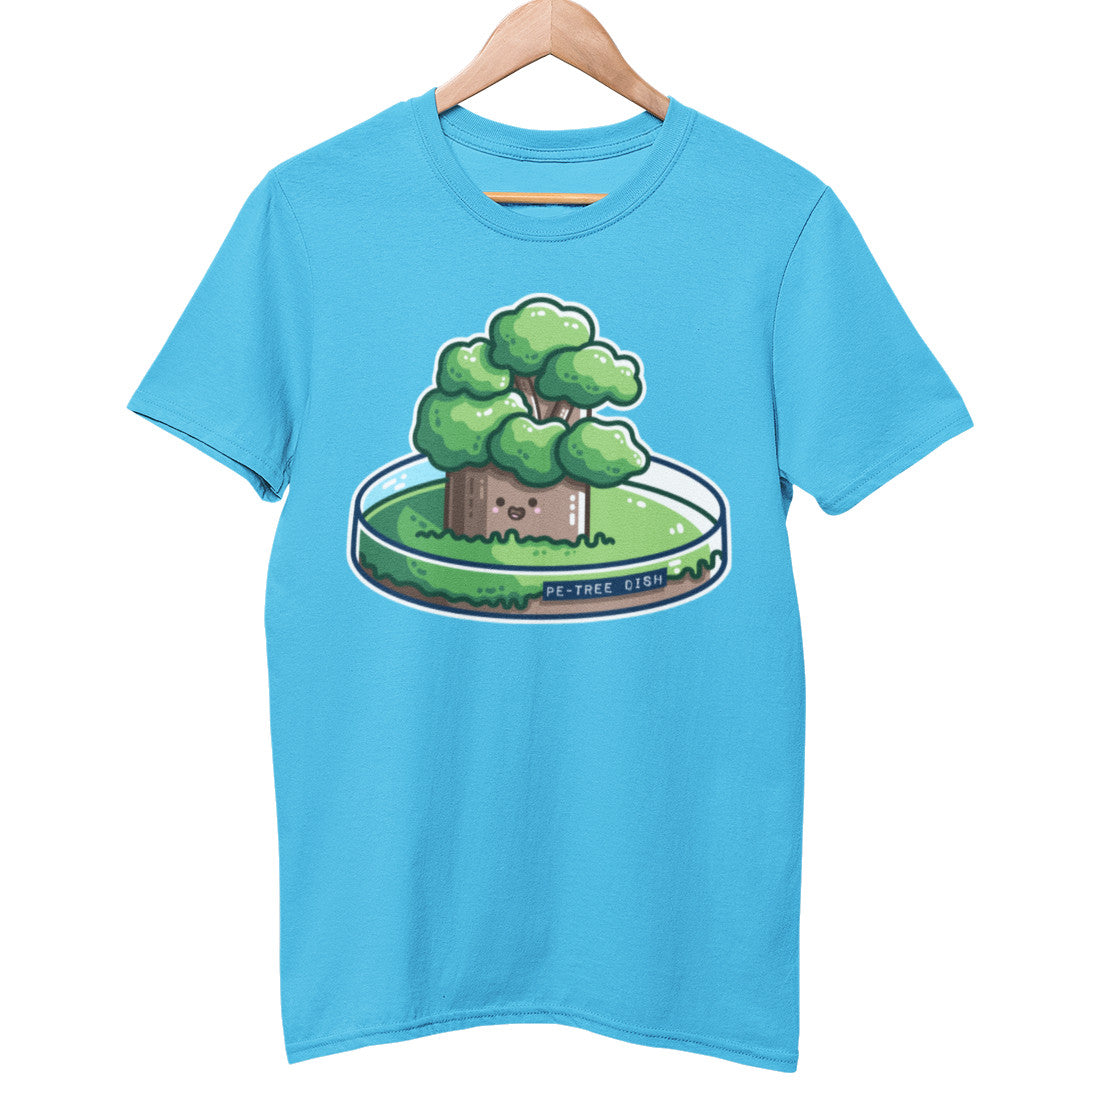 An aqua blue t-shirt on a wooden hanger, on its chest a petri dish with a cute tree growing in it